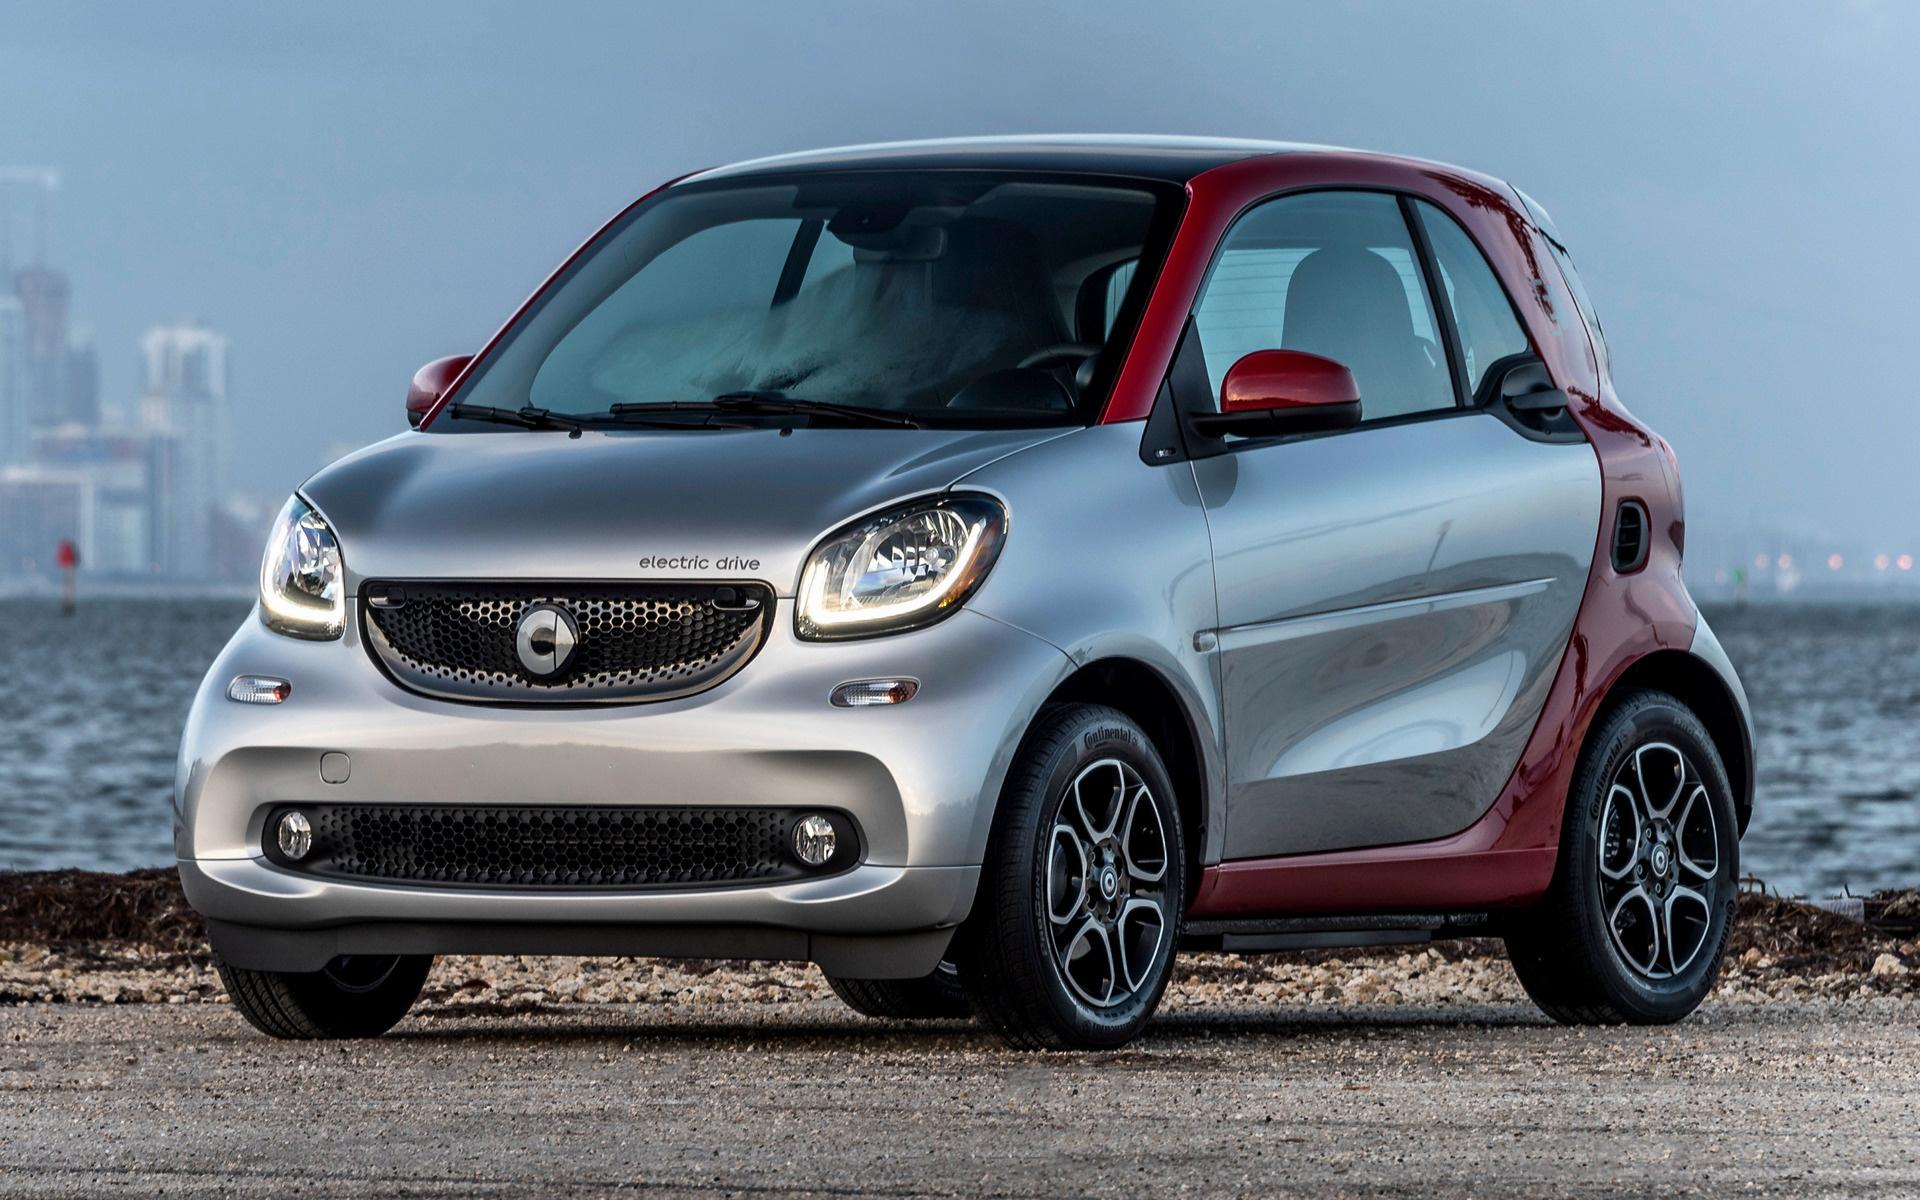 Smart Fortwo electric drive (US) and HD Image